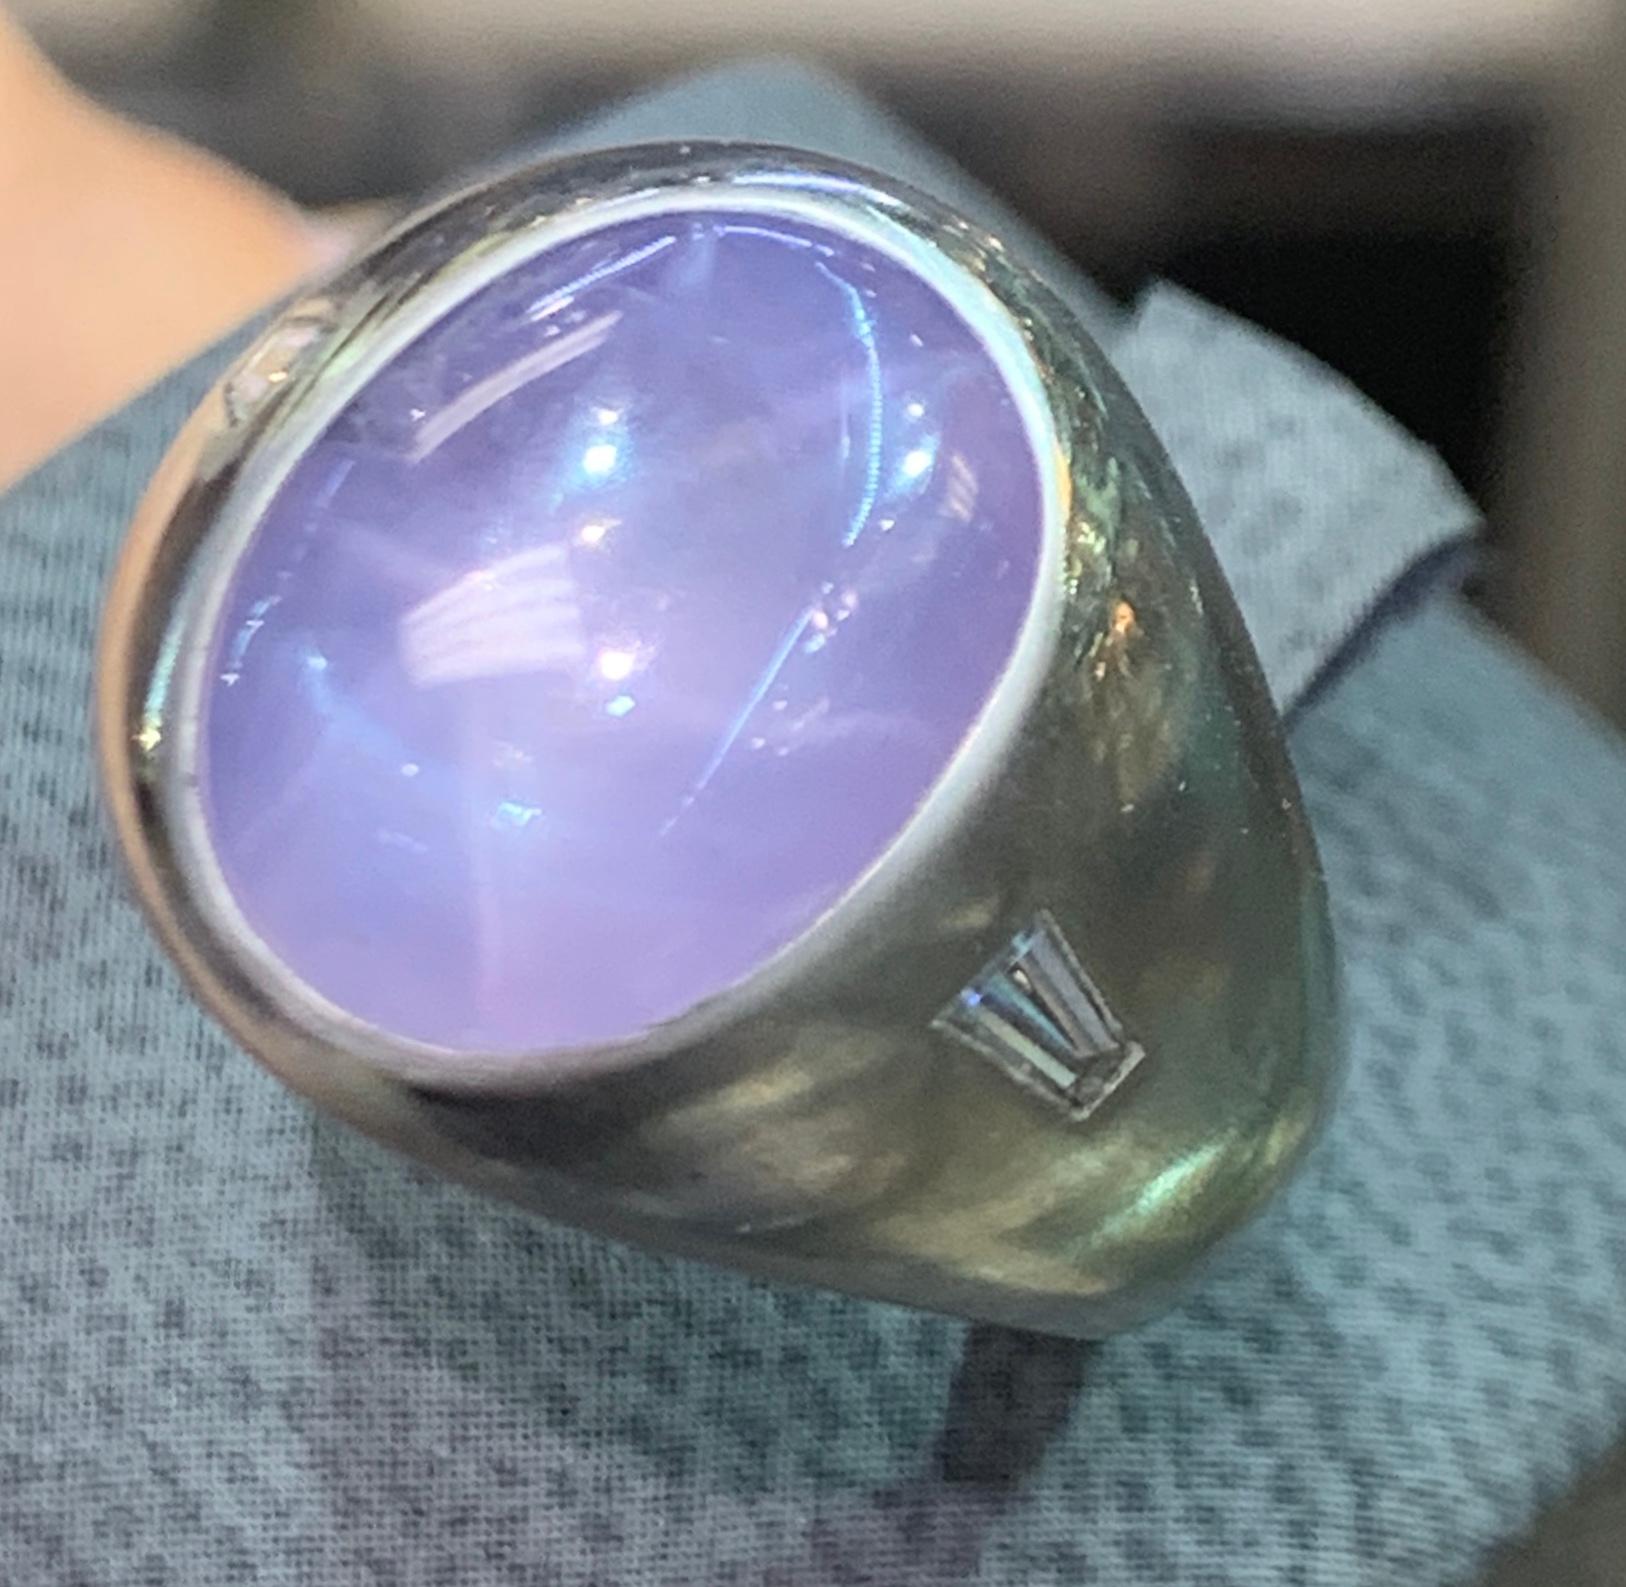 Cabochon Star Sapphire & Diamond Men's Ring 
Approximate Sapphire Weight: 9.71 Cts
Diamond Weight: .16 Cts 
Ring Size: 7
Re-sizable free of charge 